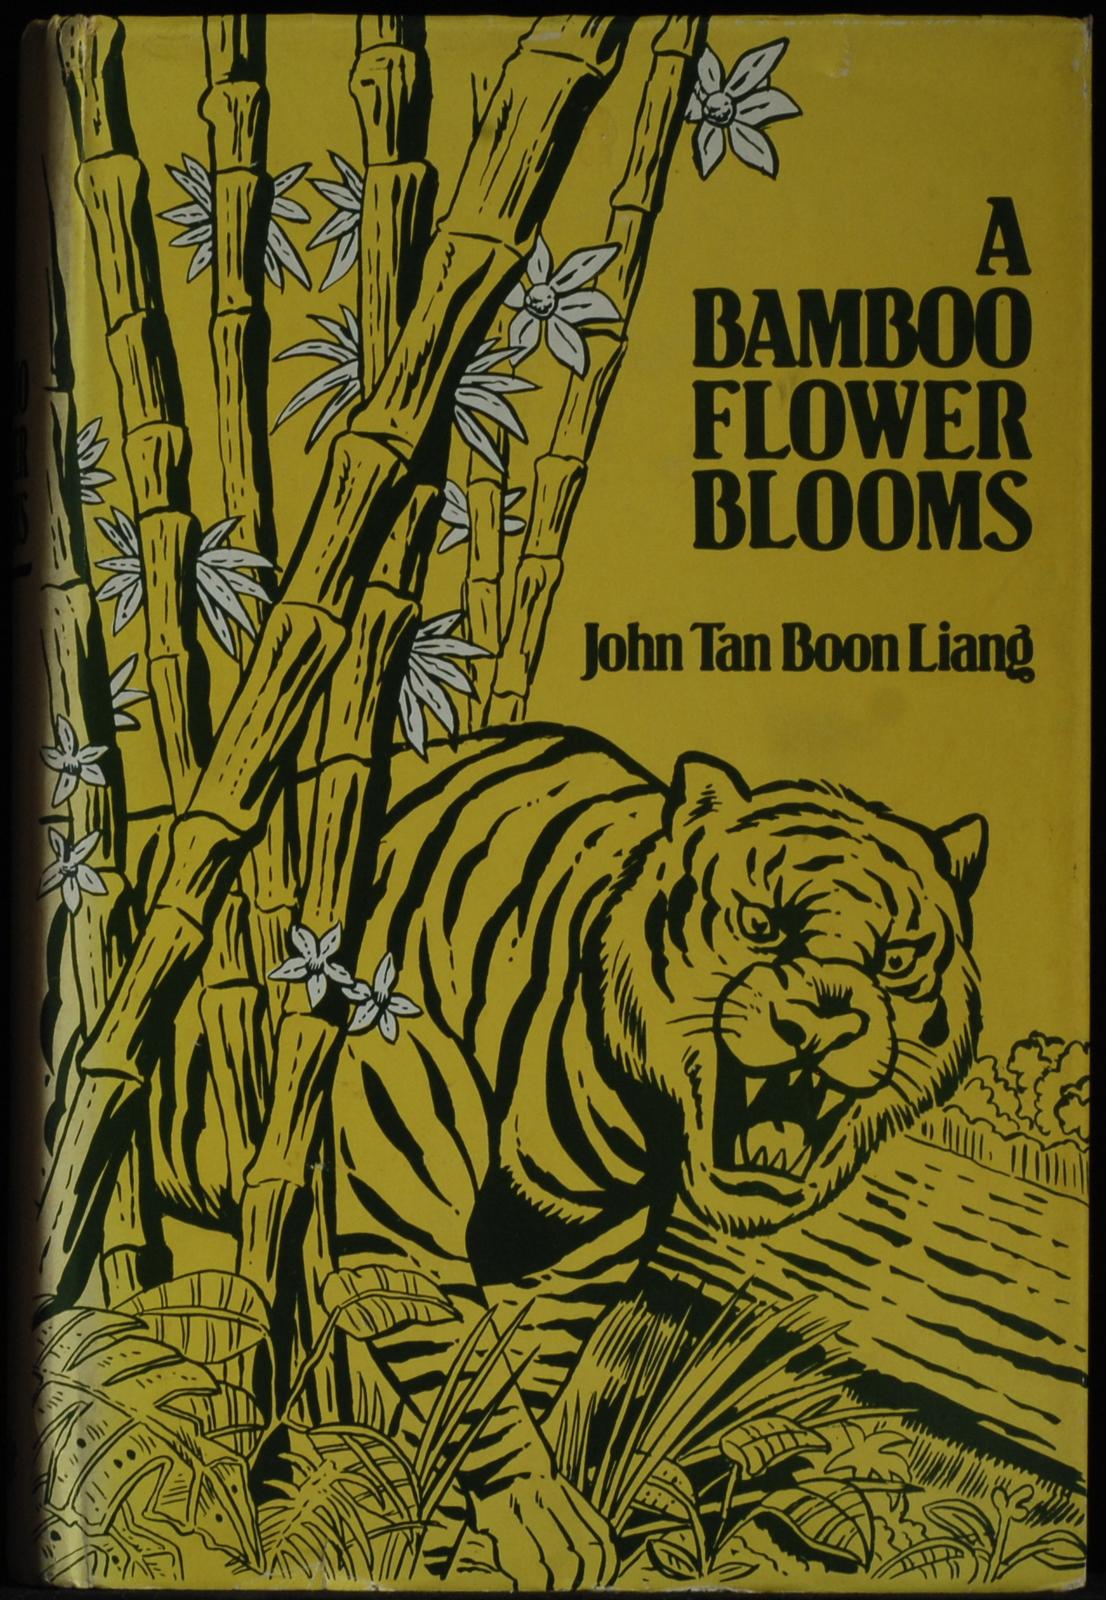 A Bamboo Flower Blooms Tan Boon Liang John [Very Good] [Hardcover] 235x152x40mm+972g . . 500g Postage Incorrect see below for 2kg . . Vintage Press. New York. 1983. First Edition. 1st Printing. Signed by Author. Pp485. Green cloth hard boards with gold lettering to spine, in original dust jacket unclipped.Head ans foot of spine rolled; slight creasing to spine;corners slight knock; bump to board edges; very slight foxing to book block edges.Dust jacket has faded spine; closed tear; minorwear to back. SIGNED AND DATED by the Author on the title page: Image is ALWAYS of the ACTUAL BOOK: Book and or Jacket may have names. dedications. marks. tears. foxing. browned pages. creasing and losses unless otherwise noted. . . Australia_Post_Zoned_International_Shipping_Rates_FOR_THIS_PARCEL . . AP-Zone1_NZ:_AU$33.80 . . AP-Zone3_Canada_USA:_AU$56.60 . . AP-Zone4_UK_Europe:_AU$62.60 . . Domestic_tracked_OR_registered_flat_rate_FOR_THIS_ITEM_Within_Australia:_AU$14.60